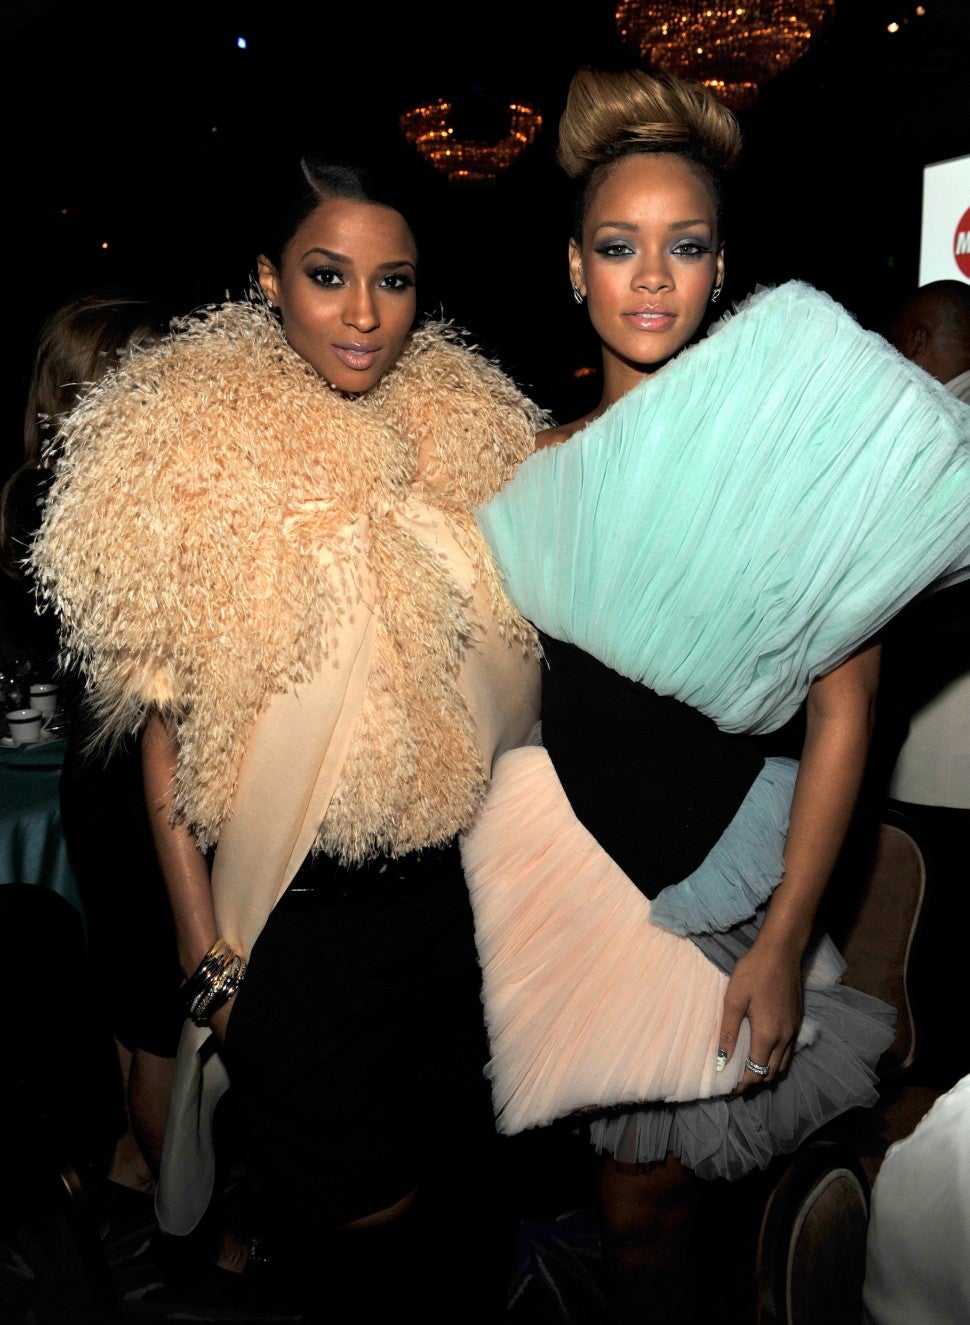 Ciara and Rihanna at the 52nd Annual GRAMMY Awards - Salute To Icons Honoring Doug Morris held at The Beverly Hilton Hotel on January 30, 2010 in Beverly Hills, California.